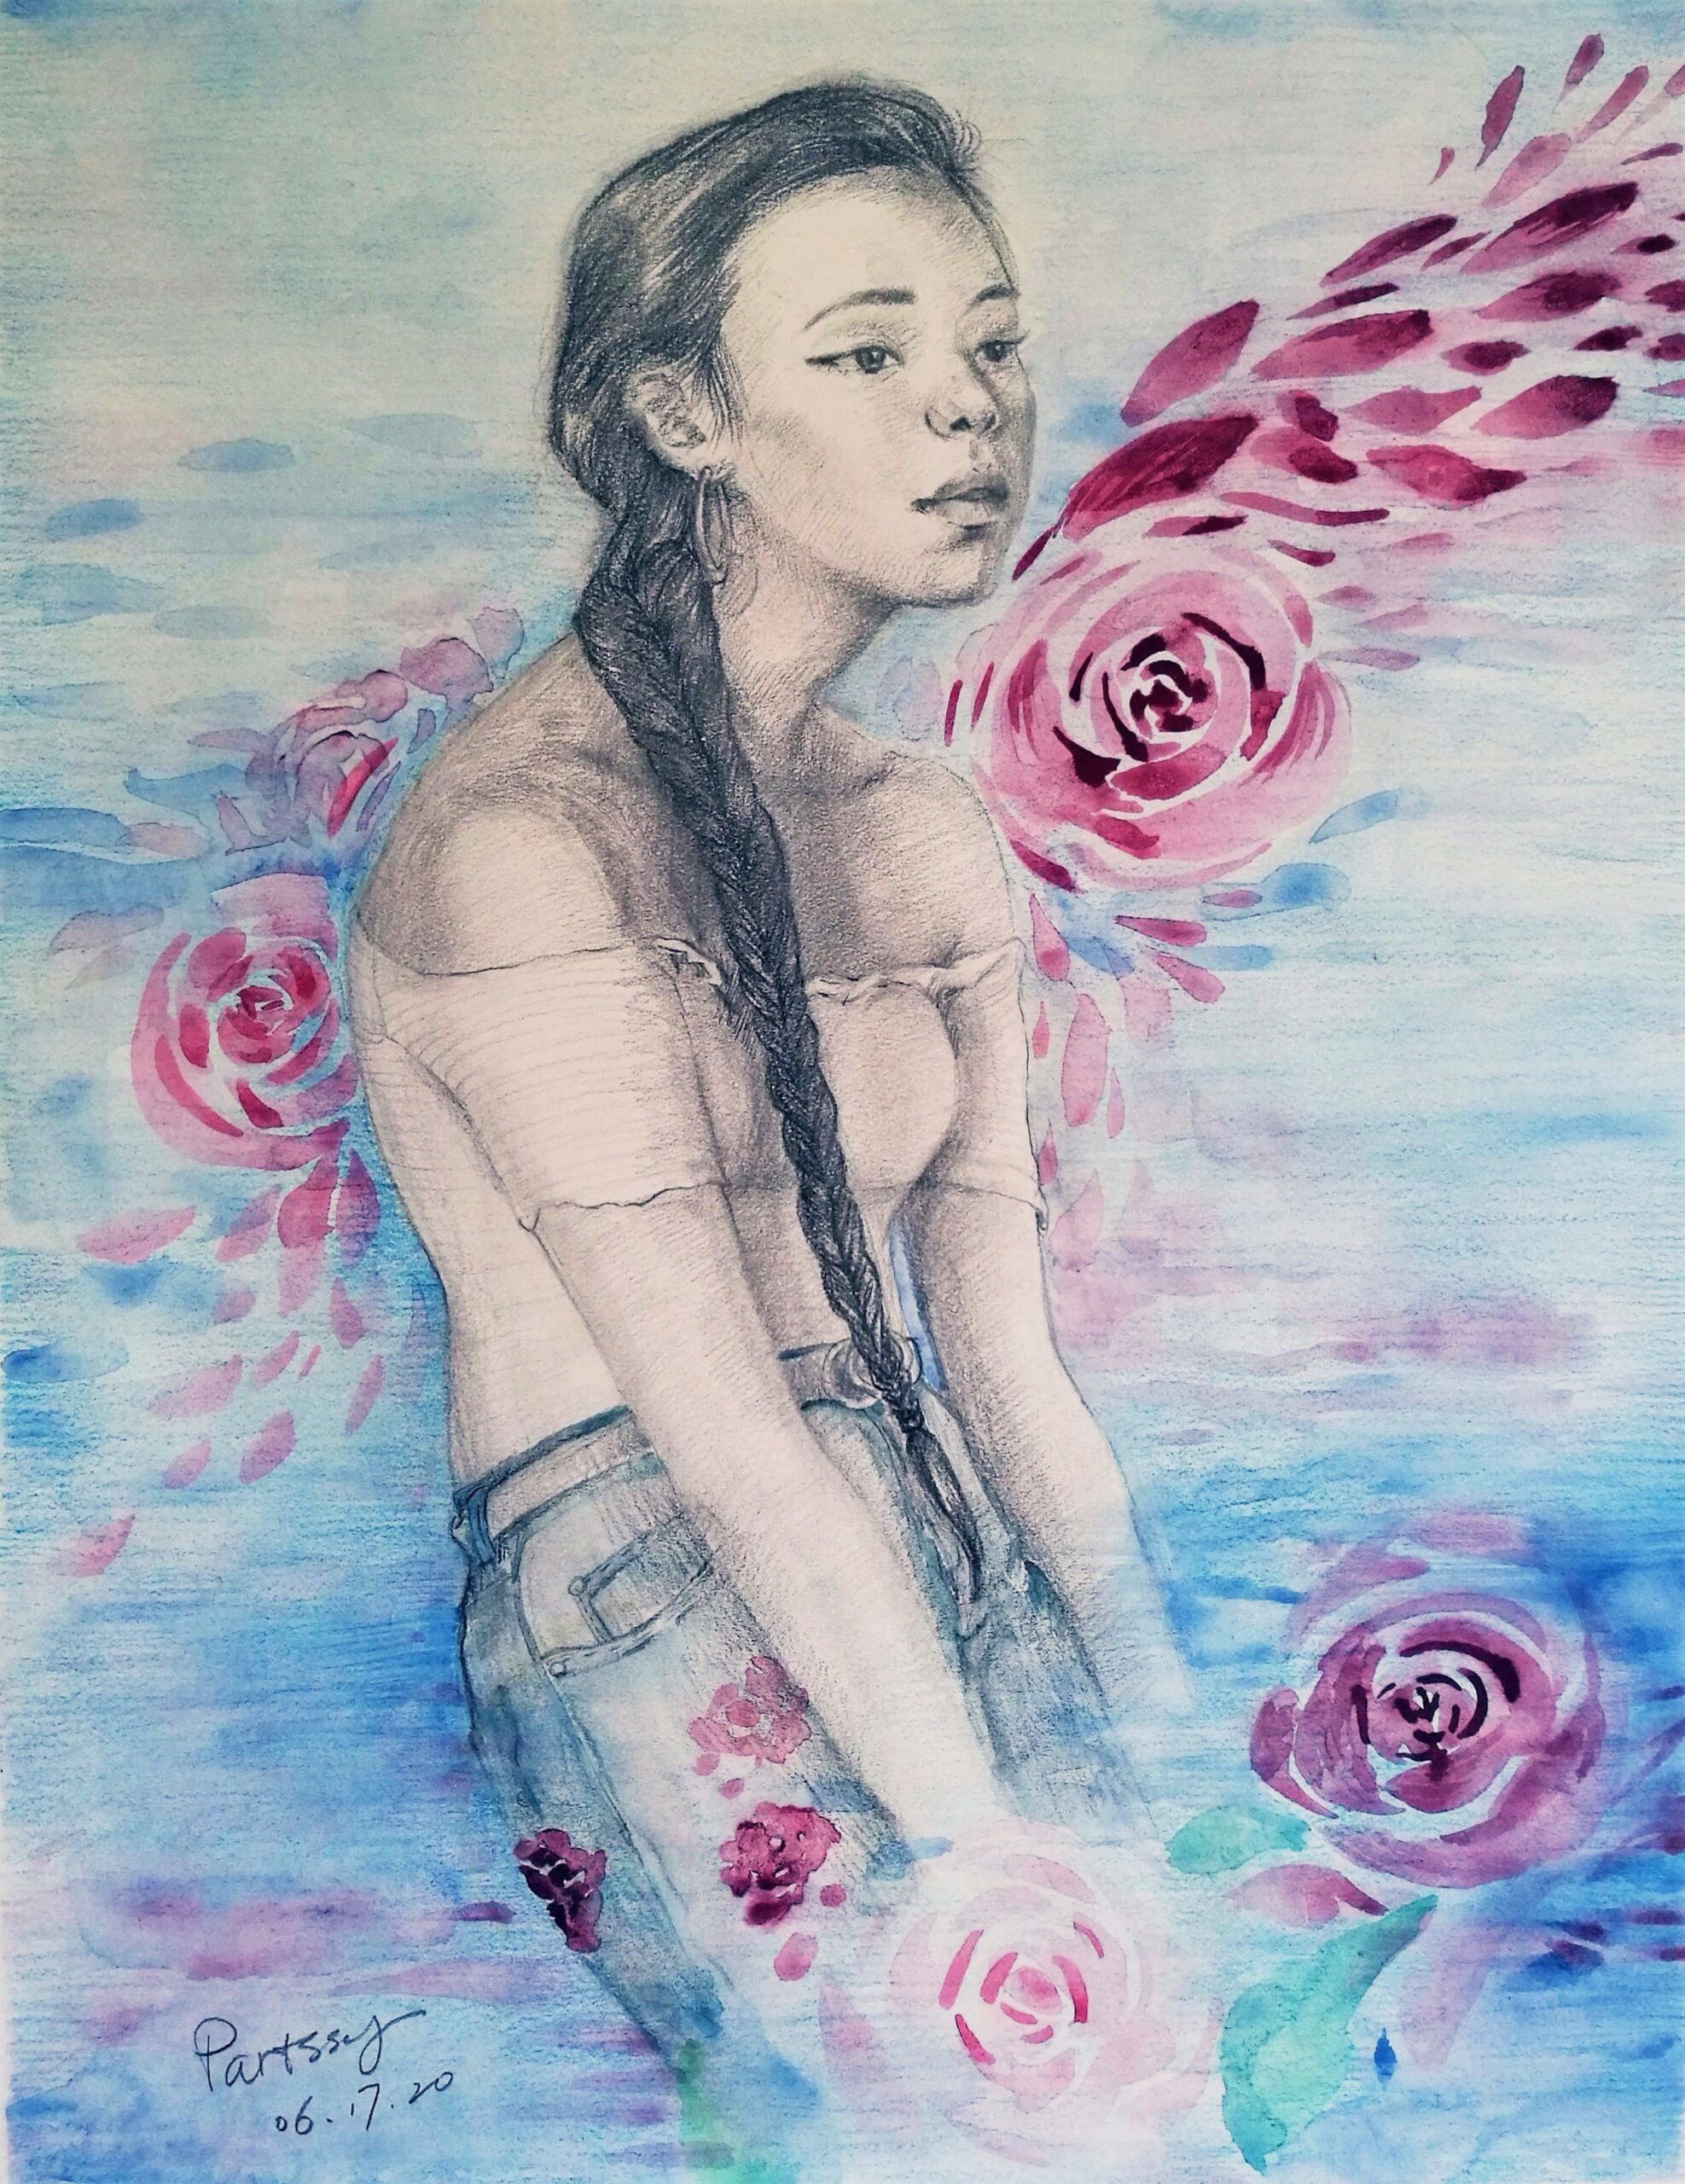 Girl sketched in pencil surrounded by watercolor flowers.